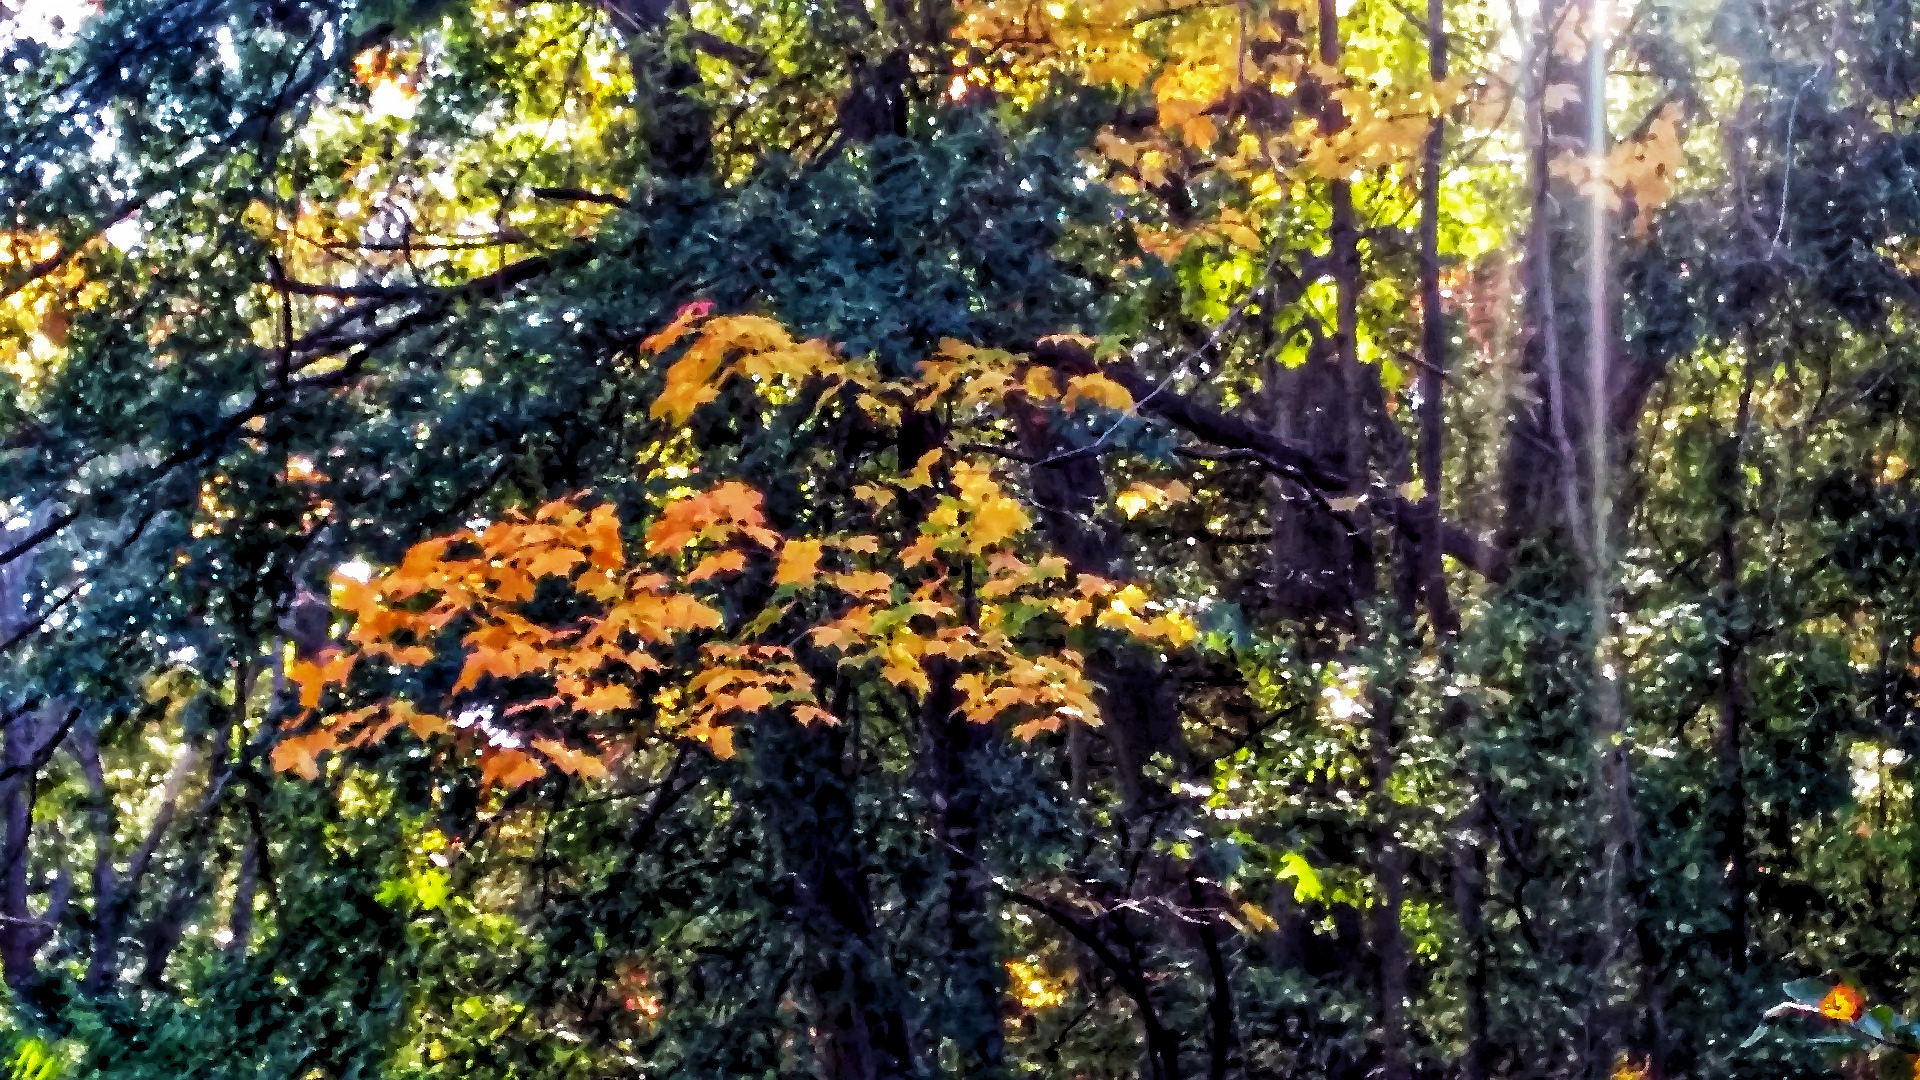 Medium-angle photgraph, manipulated to look like a painting, shows a cluster of bright orange leaves on a tree, against a backdrop of dark green leaves that are not in direct sunlilight. Around the dark green leaves are tree leaves brightly illuminated by the early afternoon sun. To the right of the orange leaves are thin streaks of sunlight. The picture has an impressionistic look.